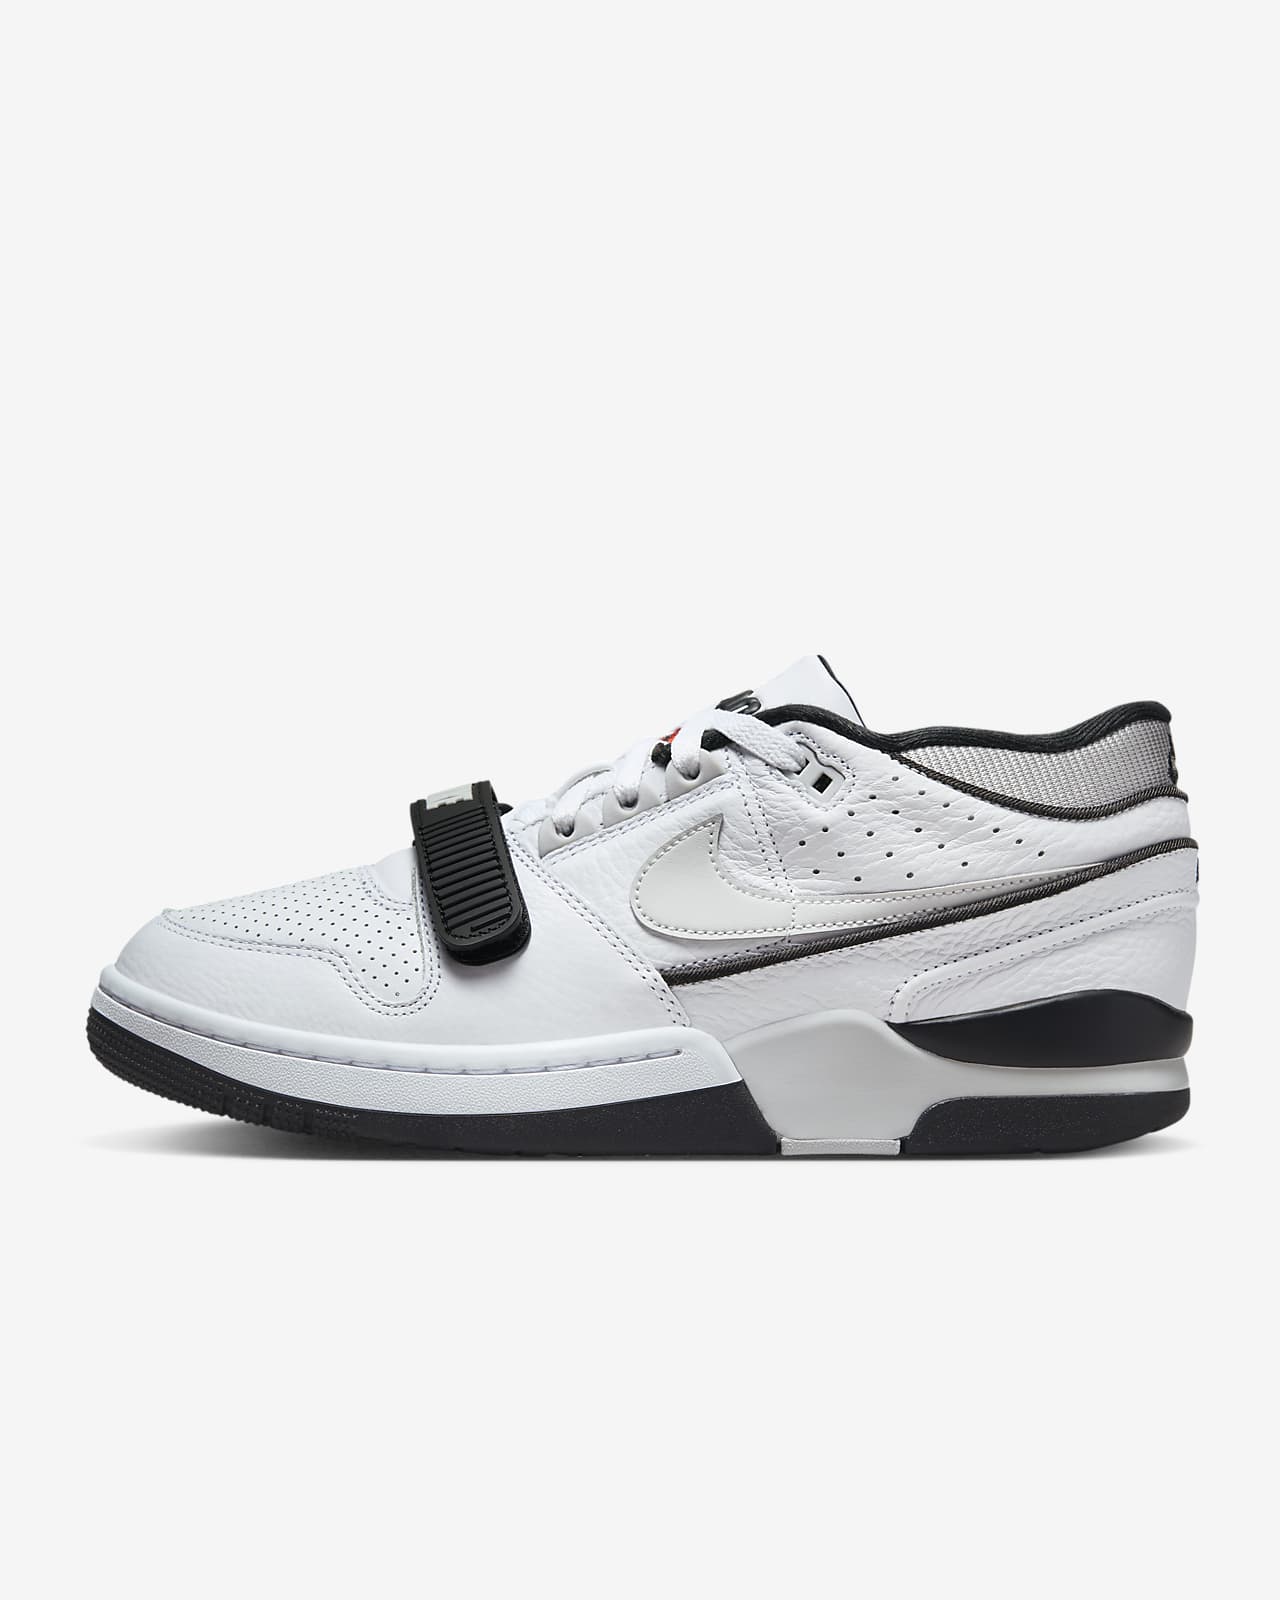 Chaussure Nike Air Alpha Force 88 pour homme